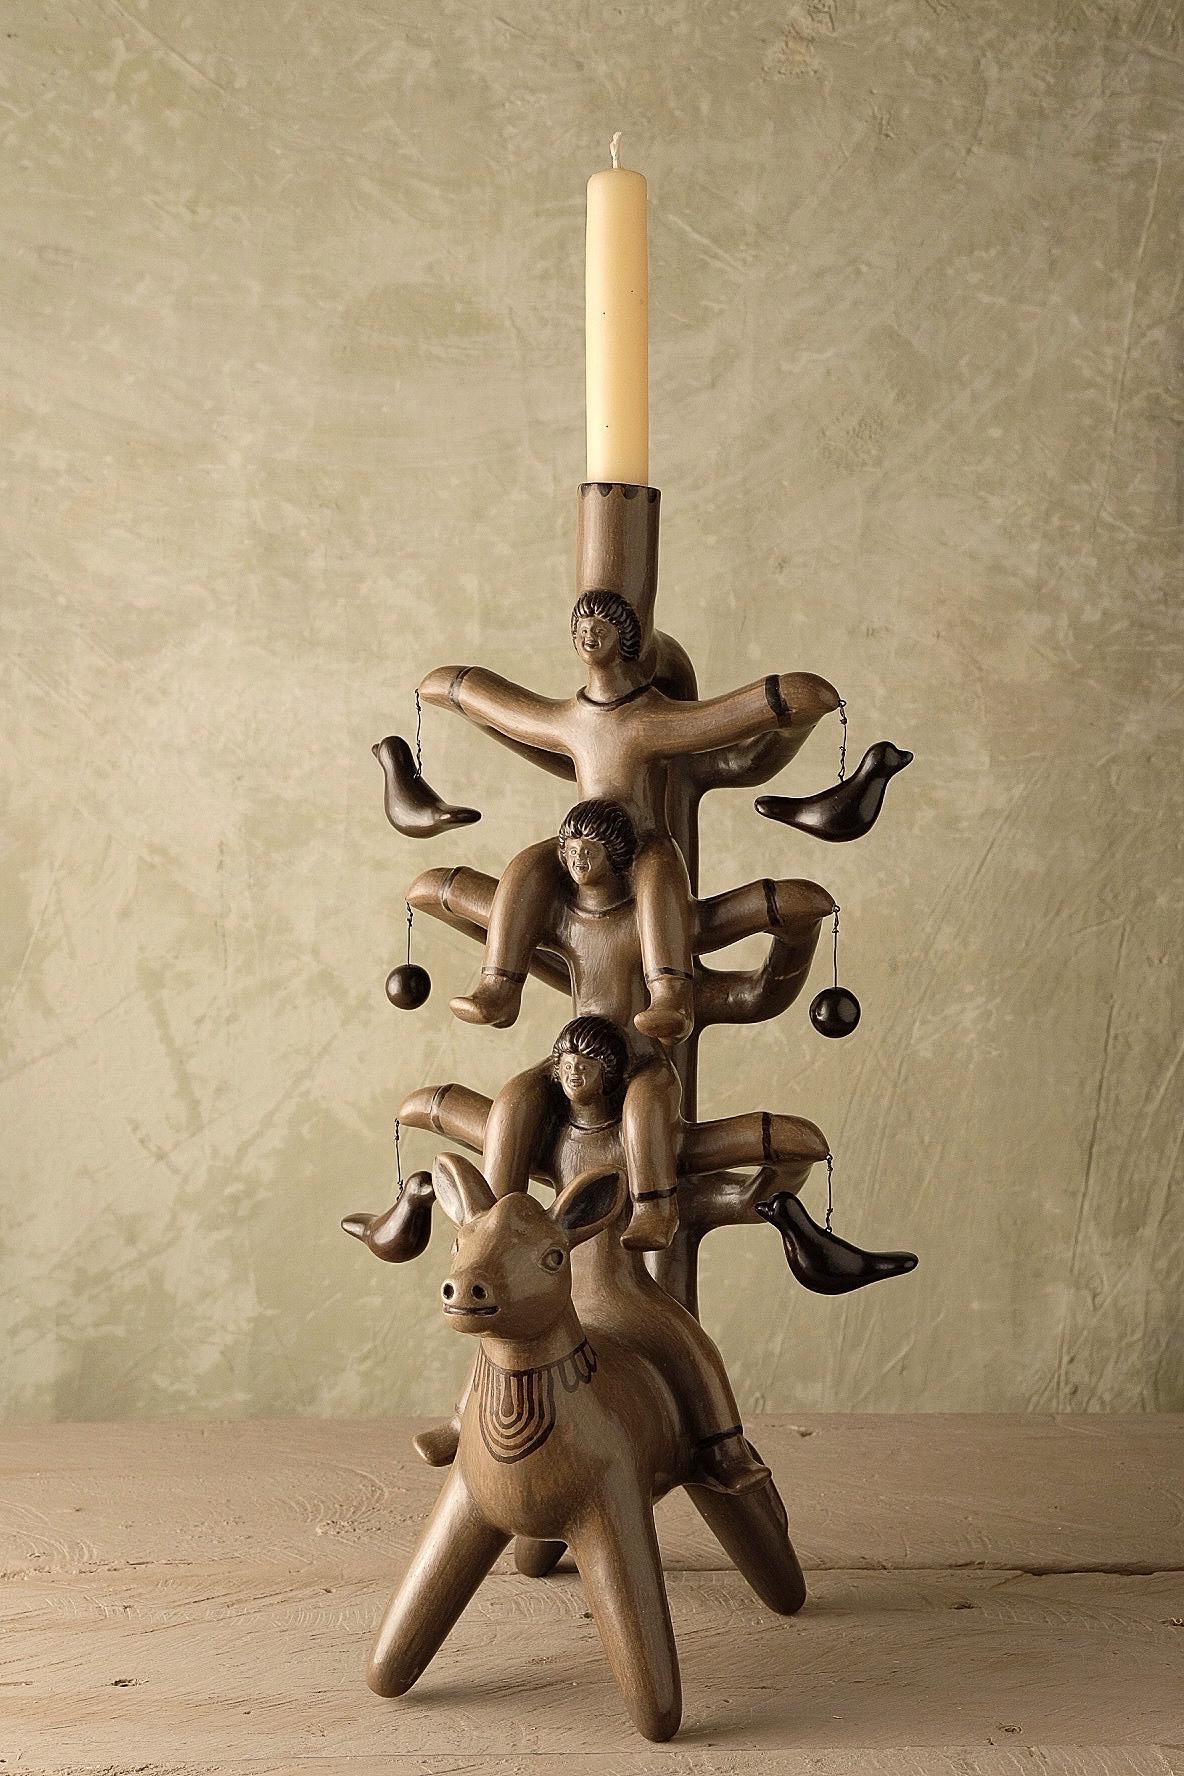 Acatlán candleholder by Onora
Dimensions: W 20 x D 15 x H 40 cm
Materials: Clay

Available in black, white and taupe Hand sculpted clay, covered with a mineral based slip and burnished using a quartz stone. The “Circo Collection” is a